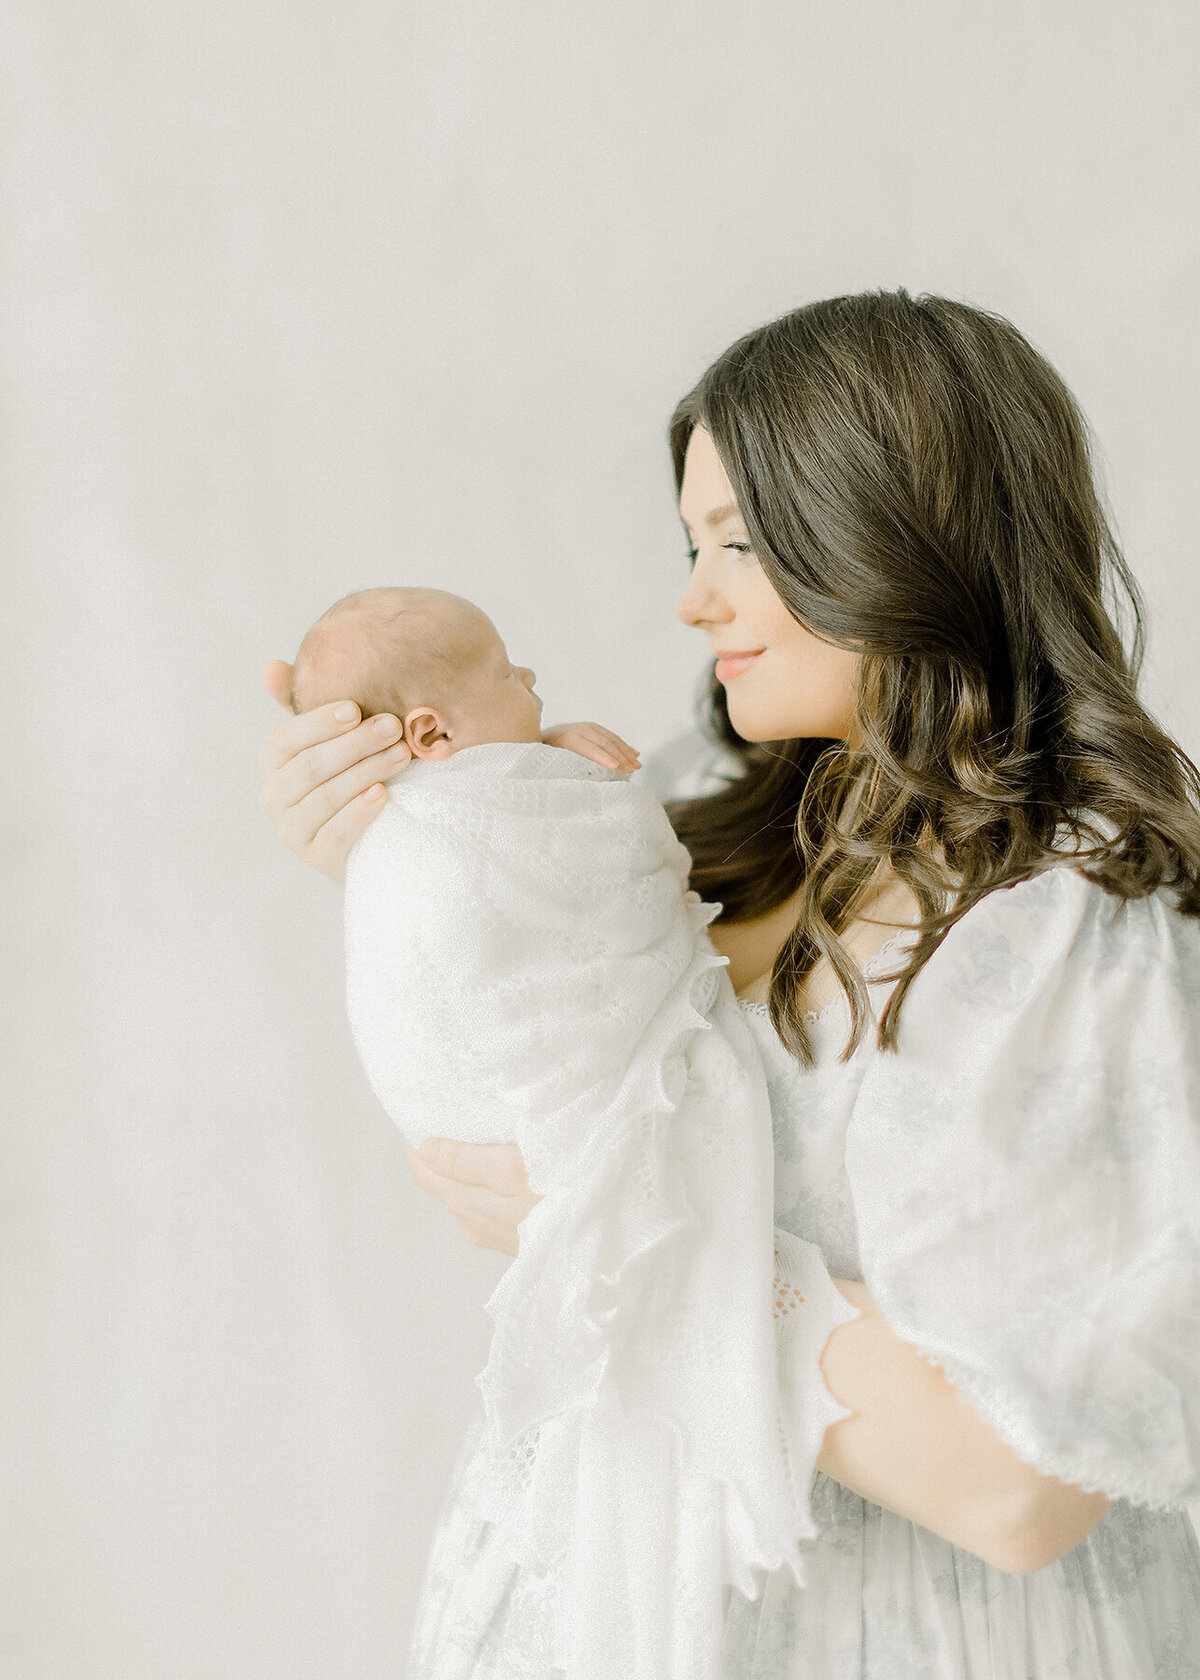 A mother standing in a Dallas Texas photography studio holding her newborn baby boy up close as she smiles and embraces him.